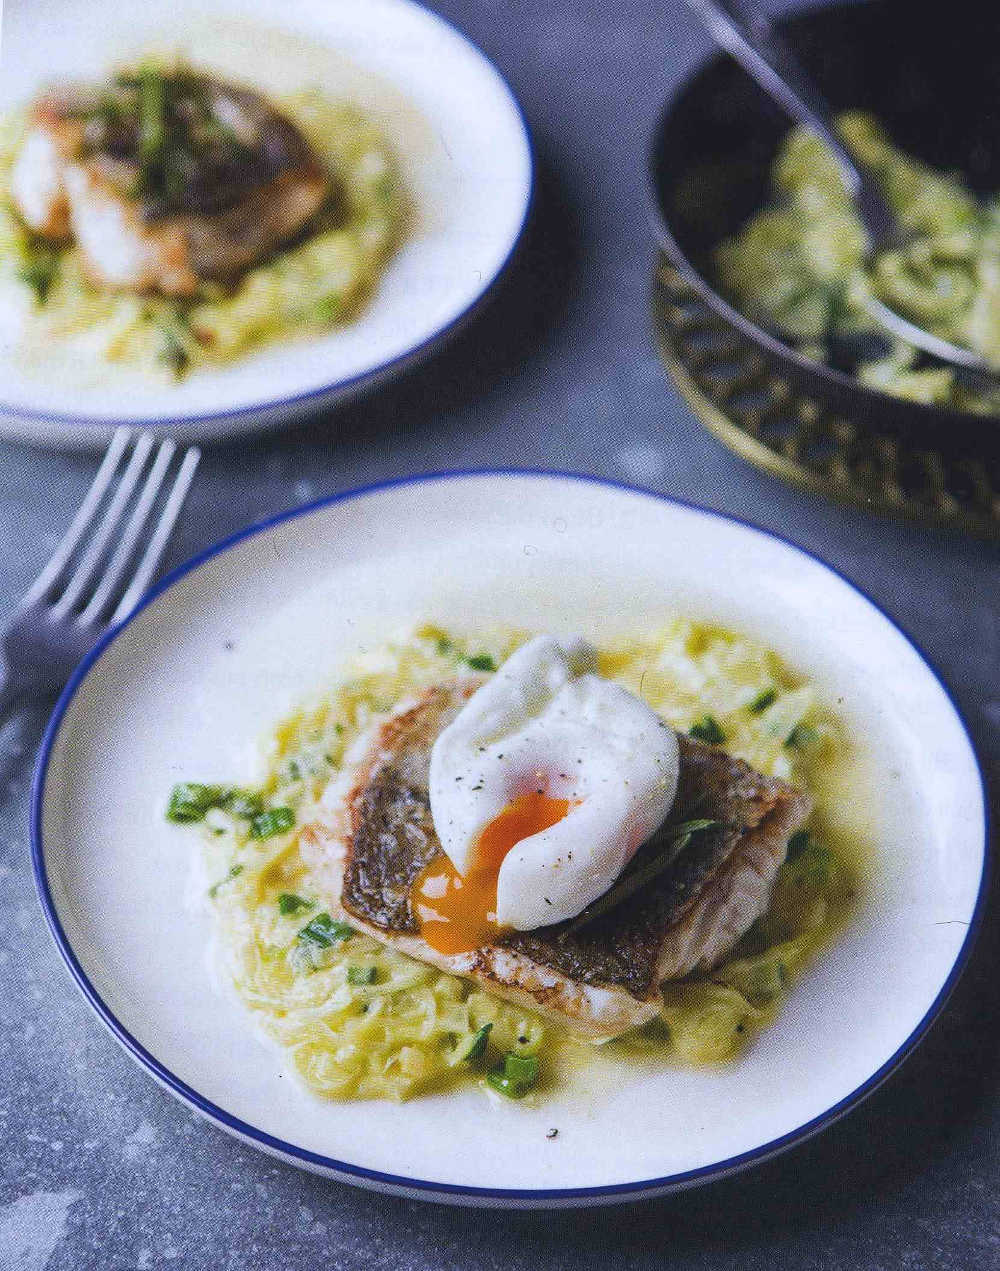 Pan-Fried Hake with Rosemary, Leeks and a Runny Poached Egg